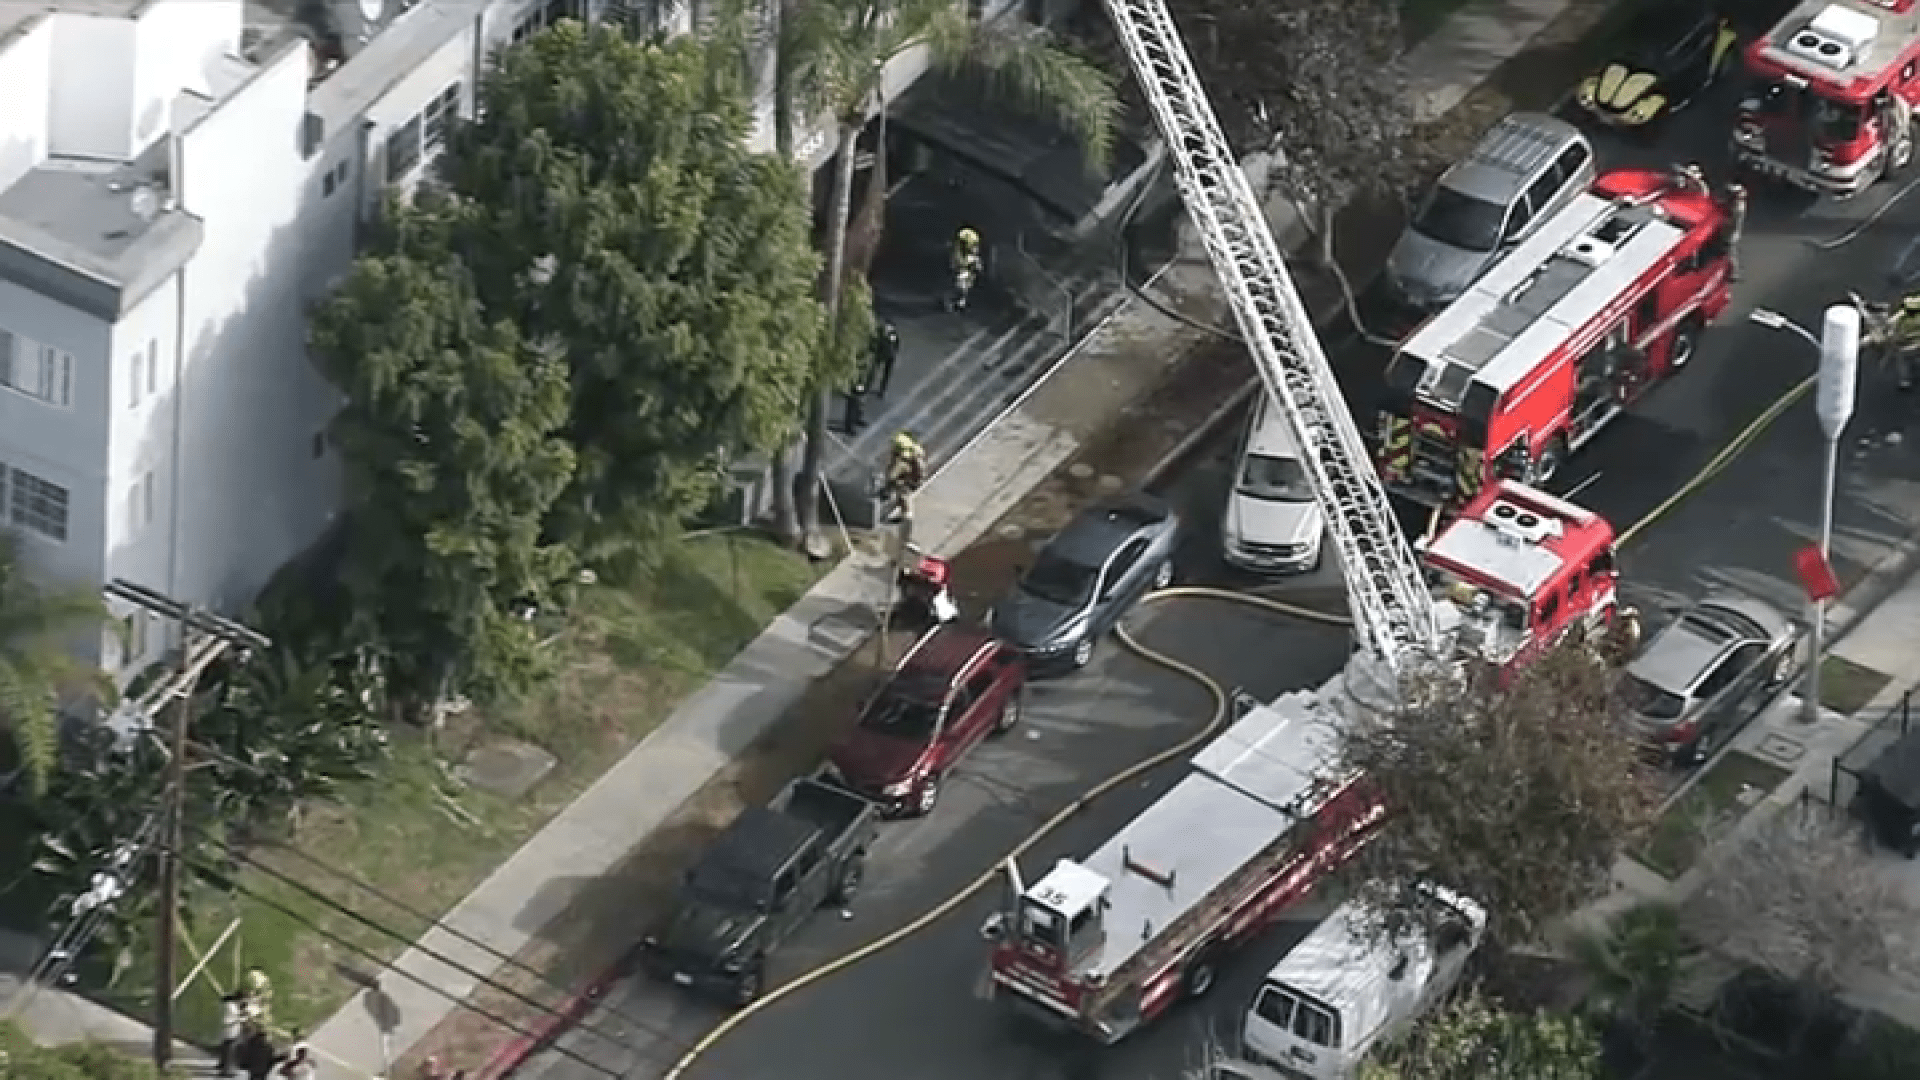 Man Dies Following Fire at Hollywood Apartment Complex